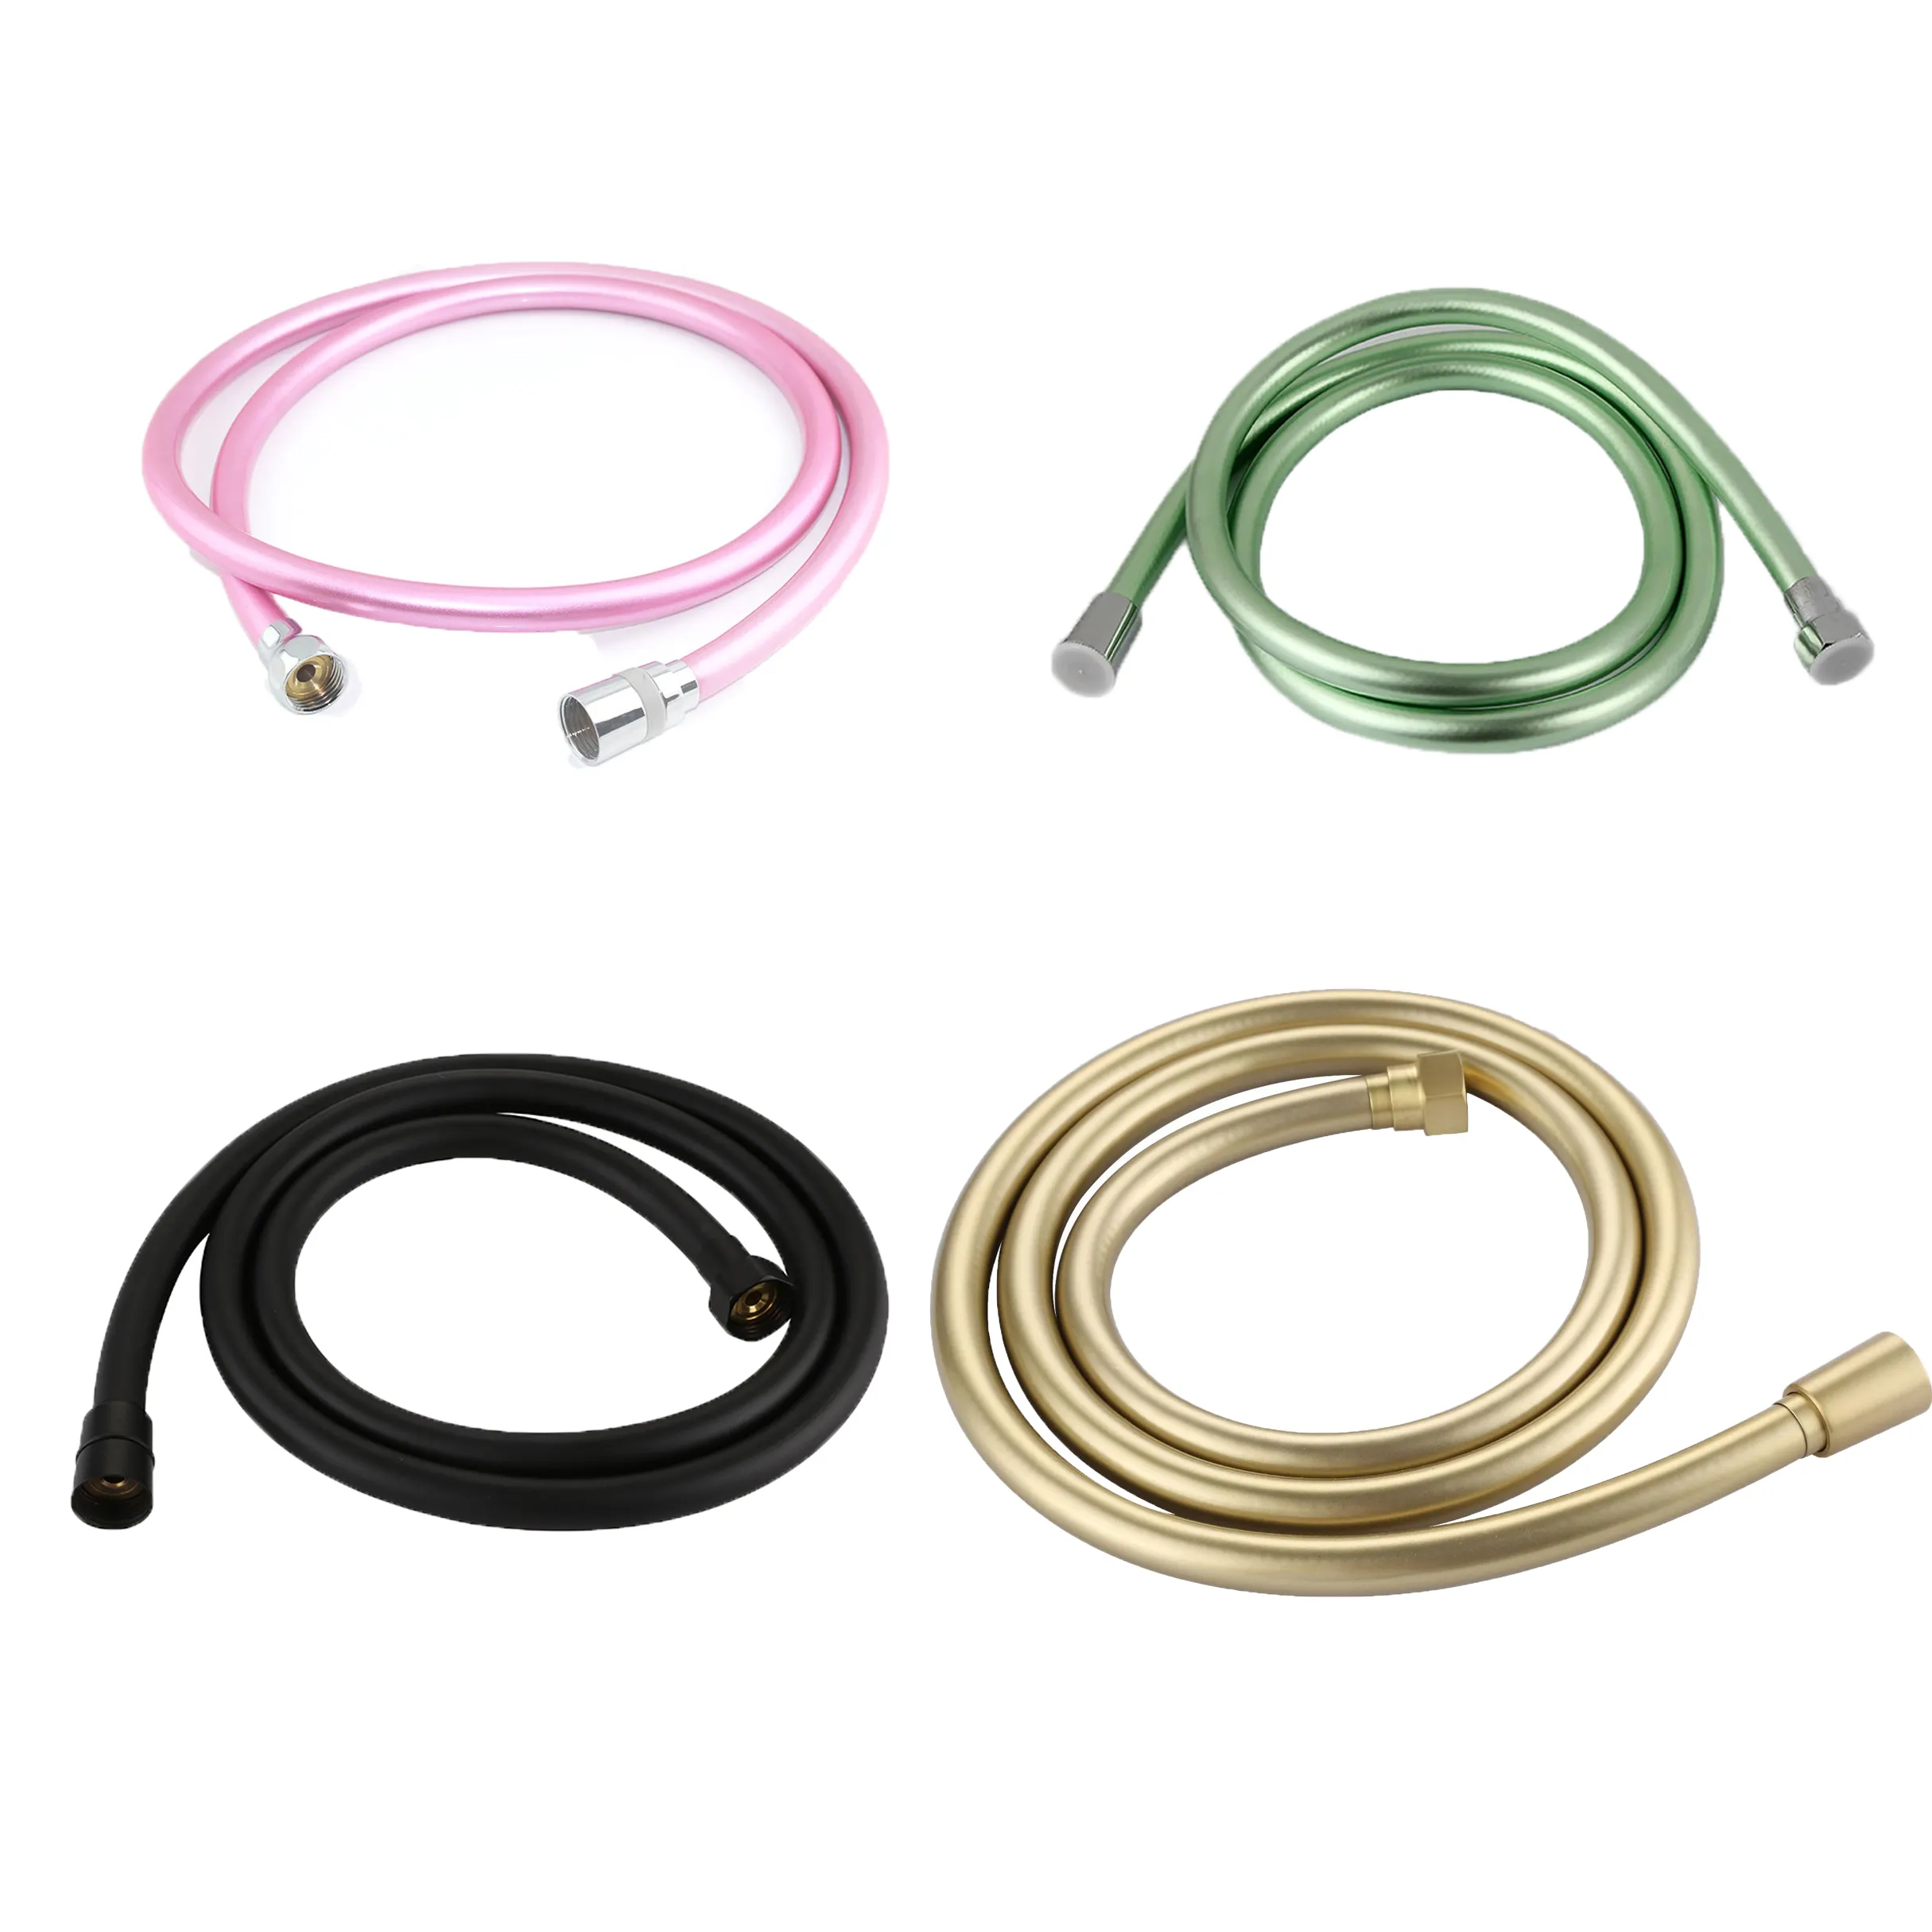 Black/green/pink/gold Shower Hose Series Flexible Pipe PVC Water Hose With Brass Connections